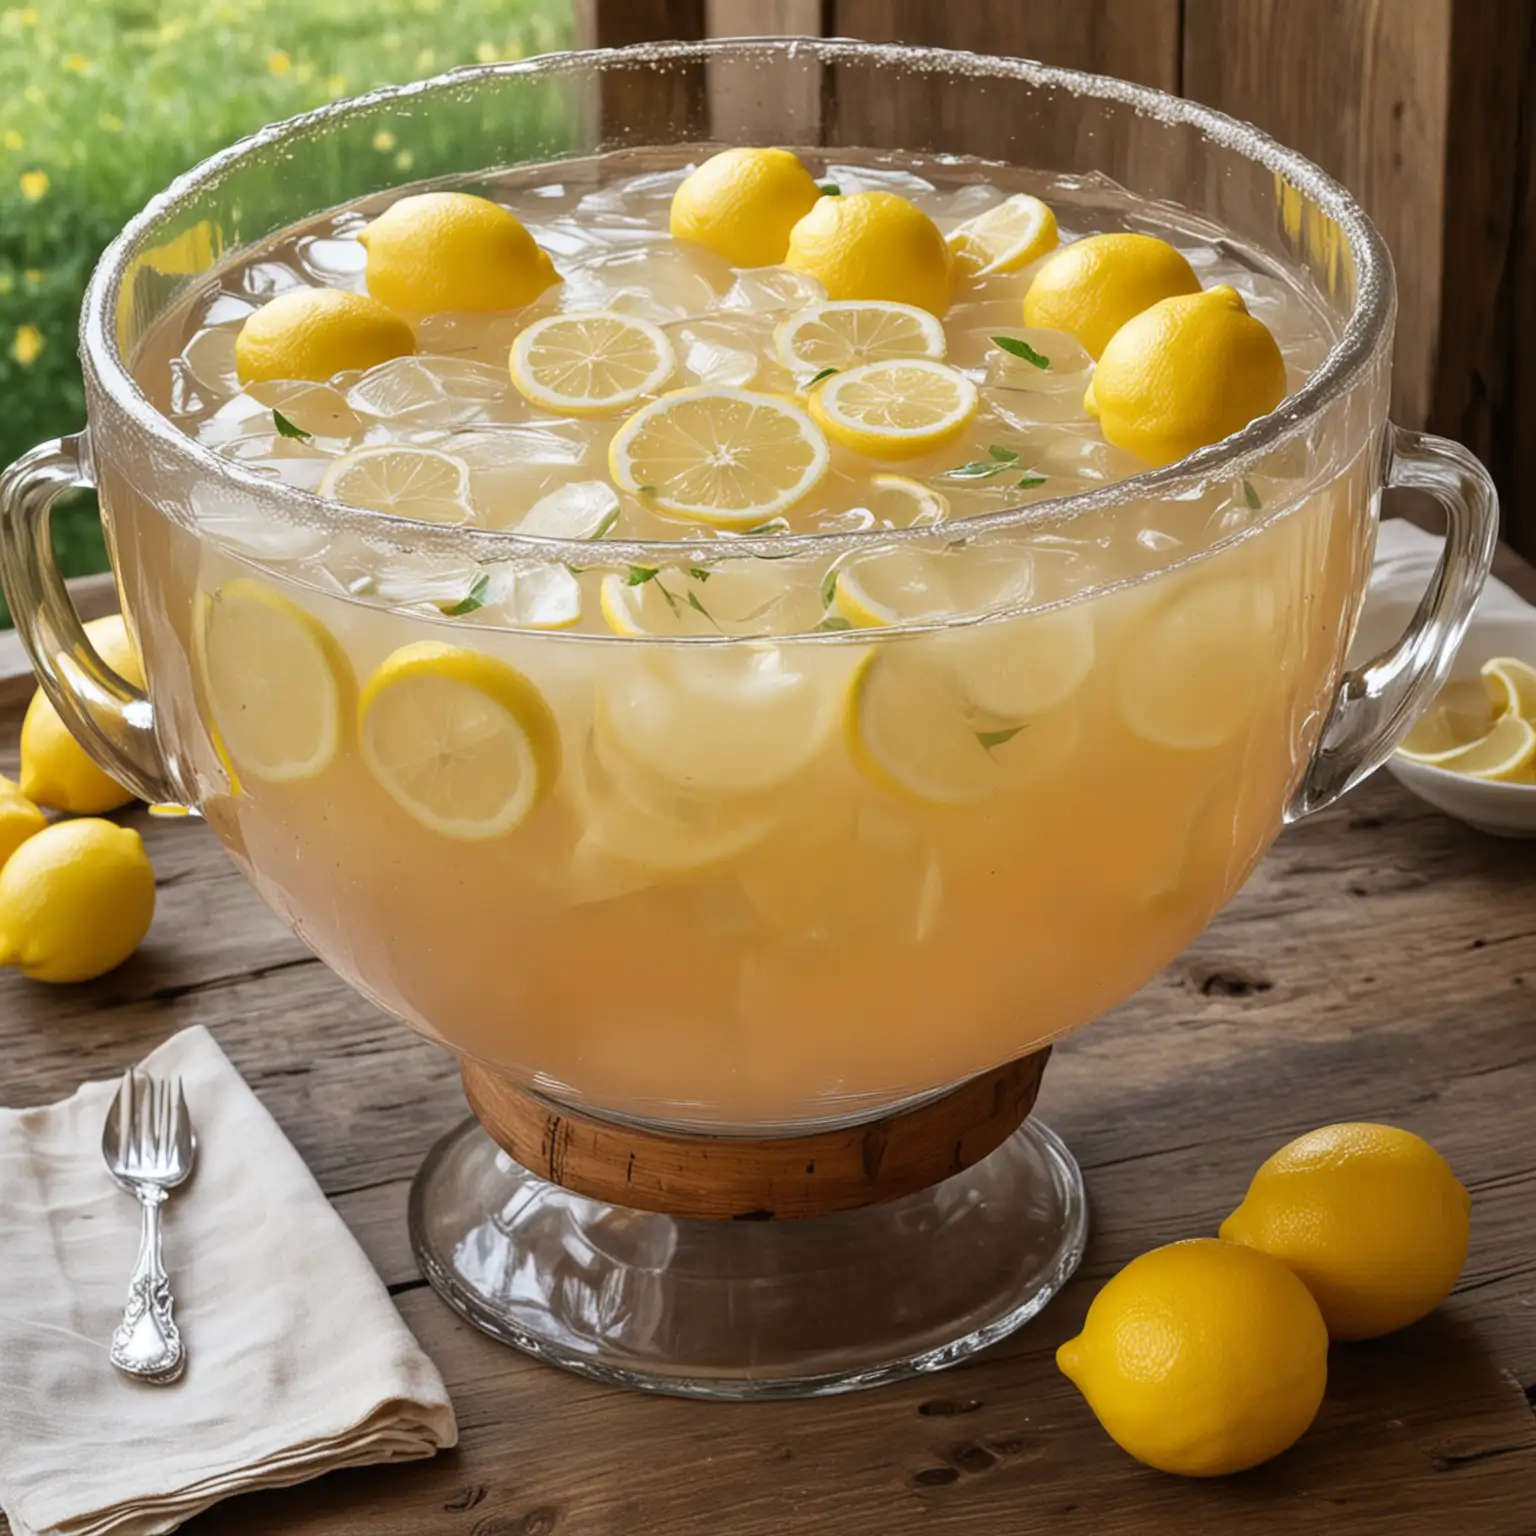 rustic punch bowl filled with lemonade and lemons and nothing else in image